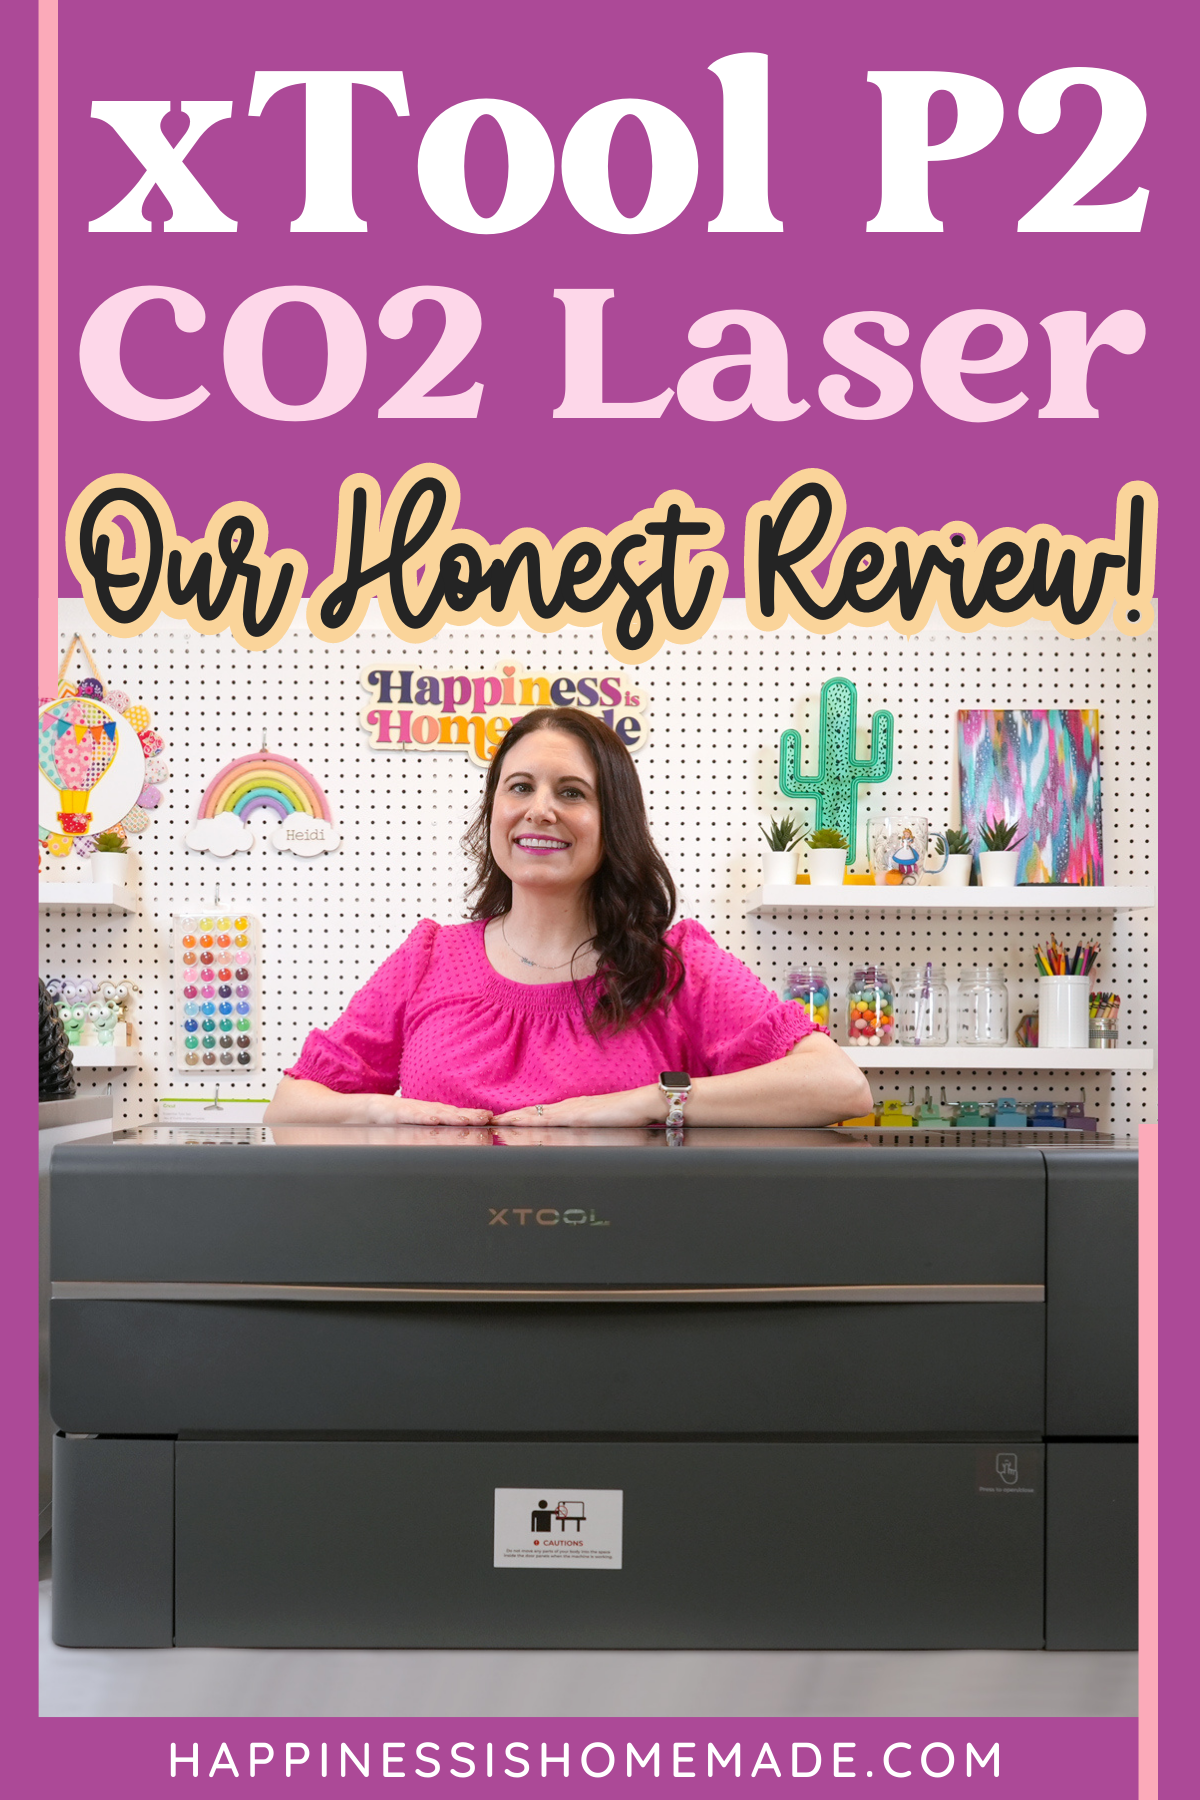 "xTool P2 CO2 Laser - Our Honest Review!" graphic